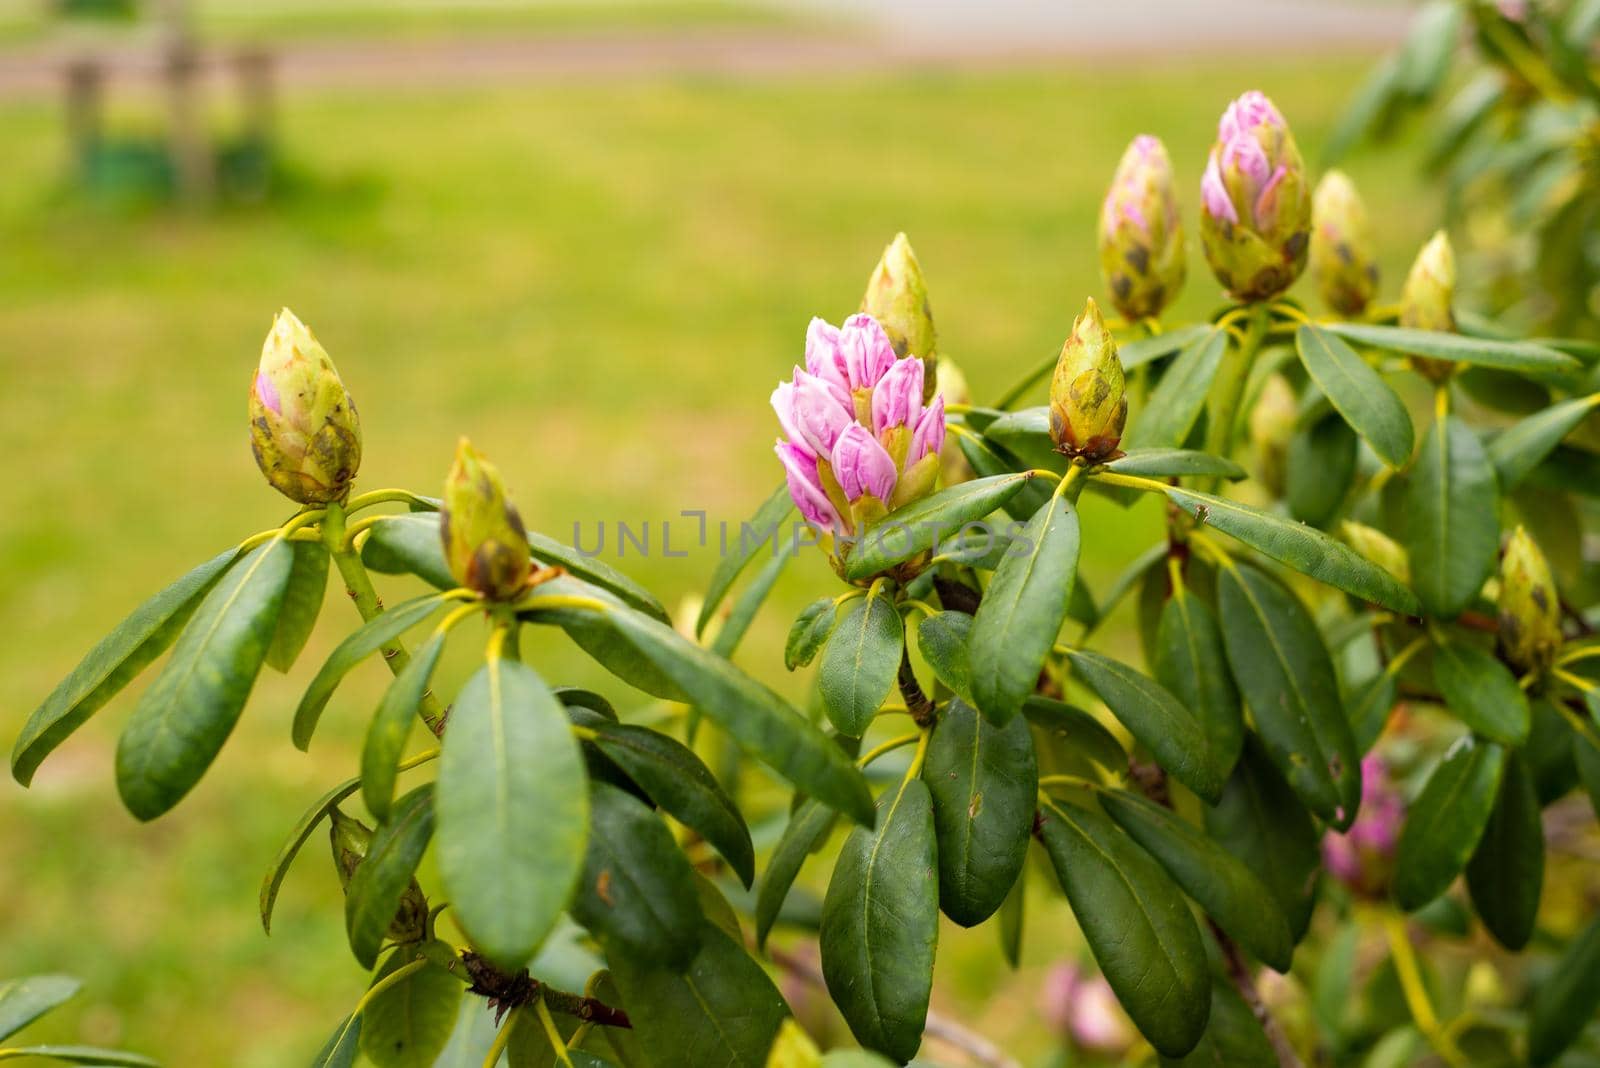 pink purple rhododendron buds in the spring garden by ozornina